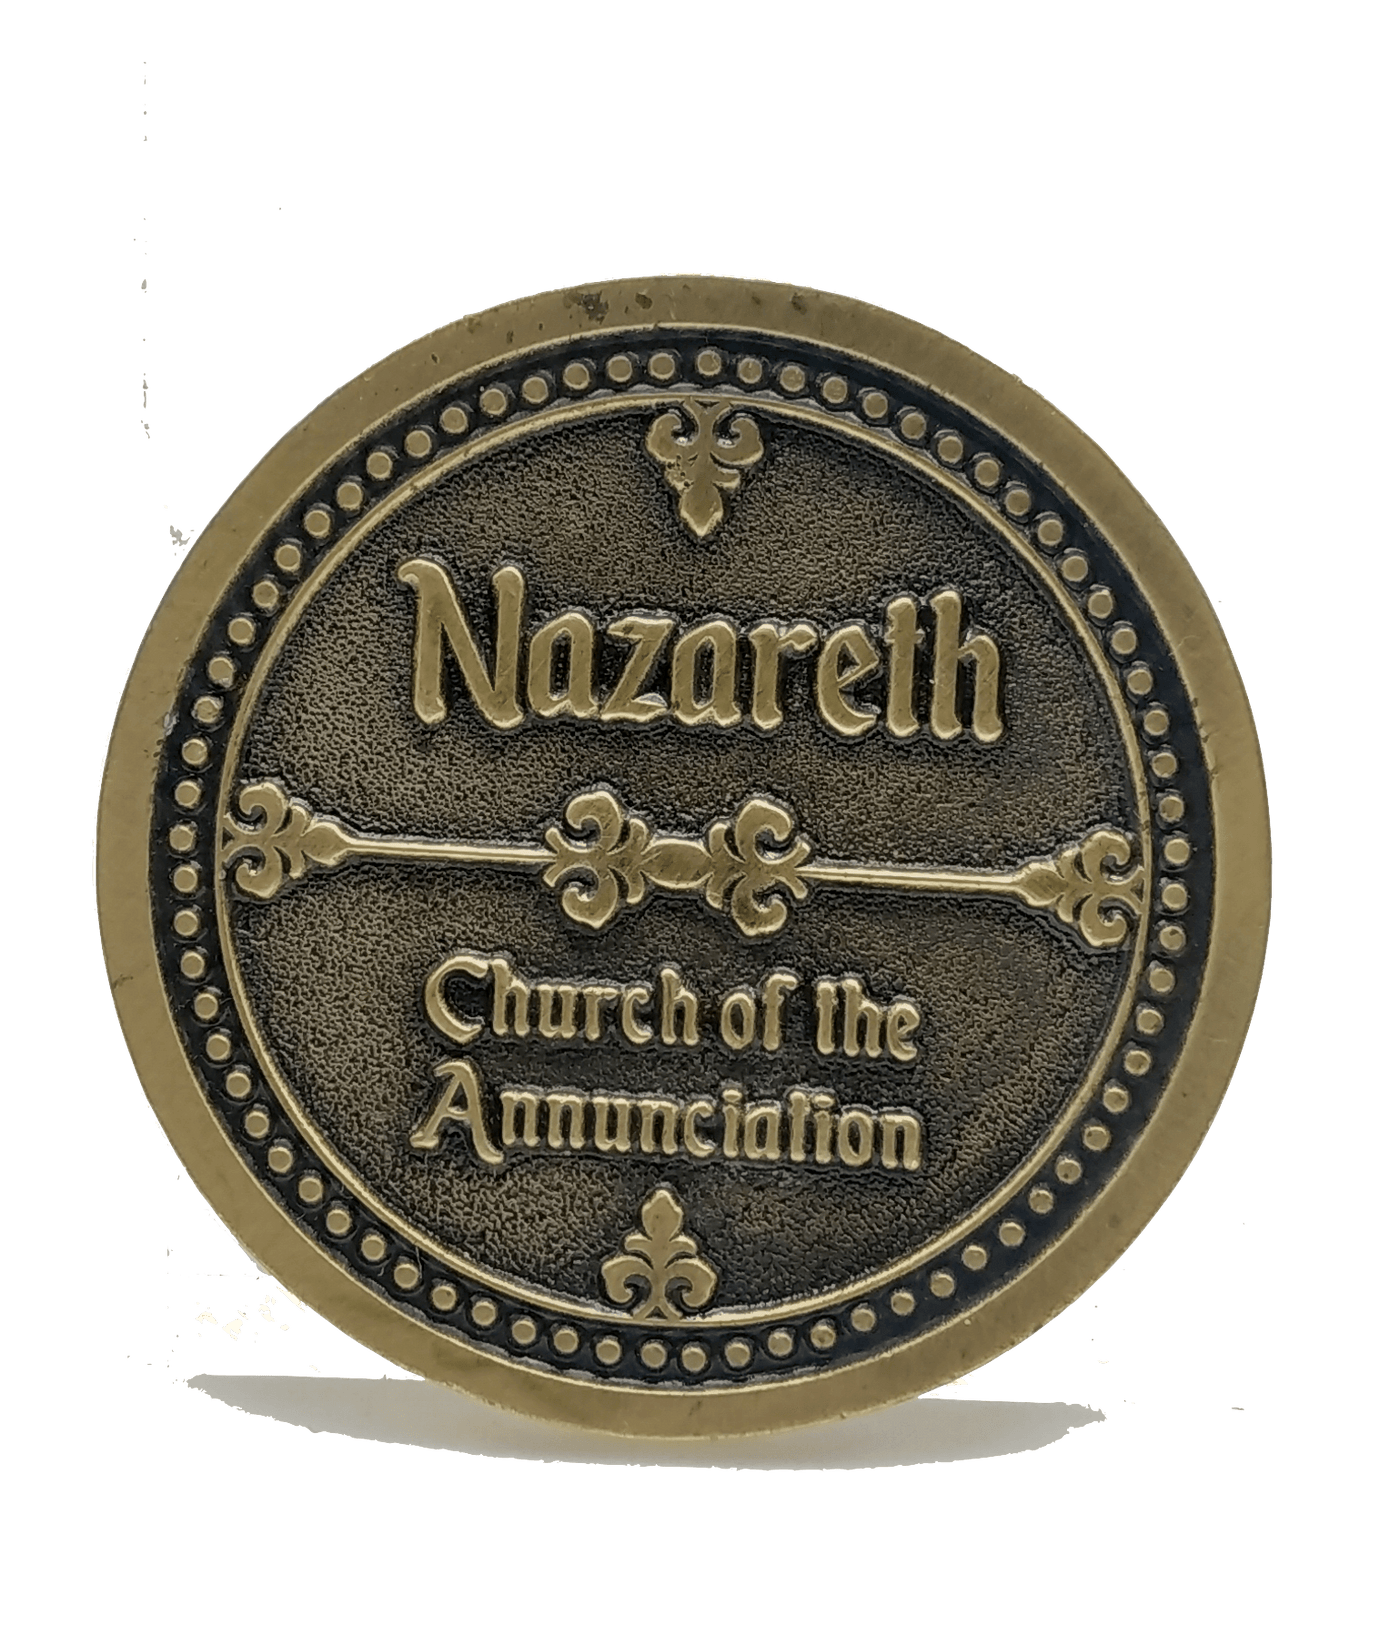 6 Holy Land Israel Church Coins: Church of The Holy Sepulchre, Basilica of The Annunciation, Church of The Nativity Coin Israel Souvenir from The Holyland (Silver Color & Gold Color) - Spring Nahal